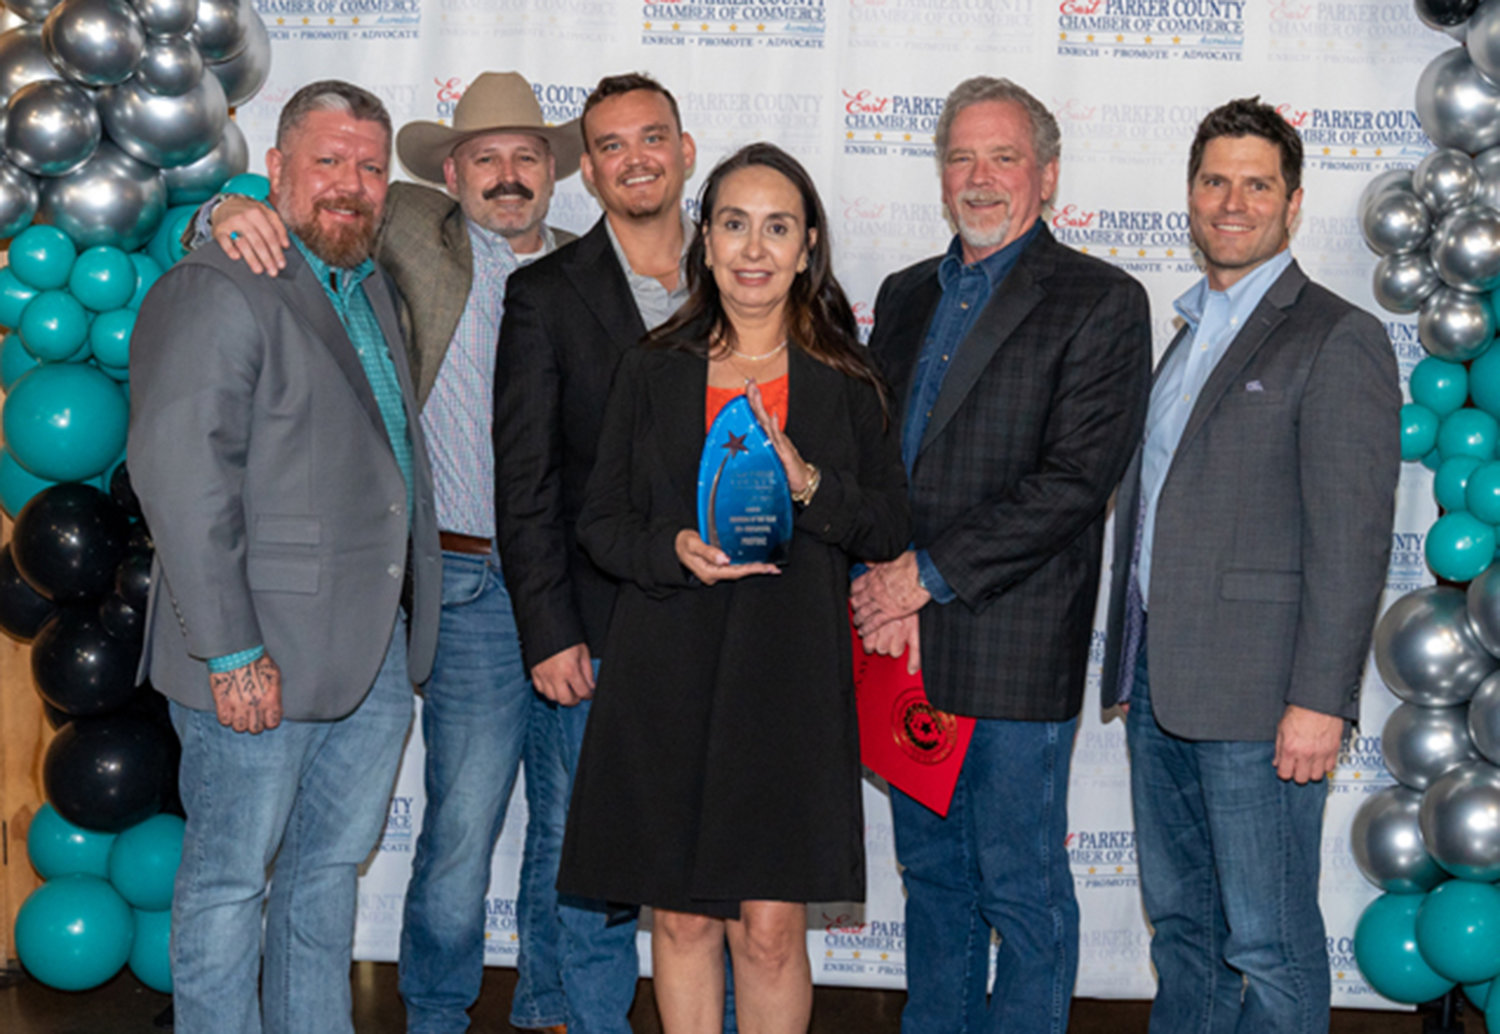 The award for Business of the Year (51+ Employees) was presented to ProFrac Holdings LLC.